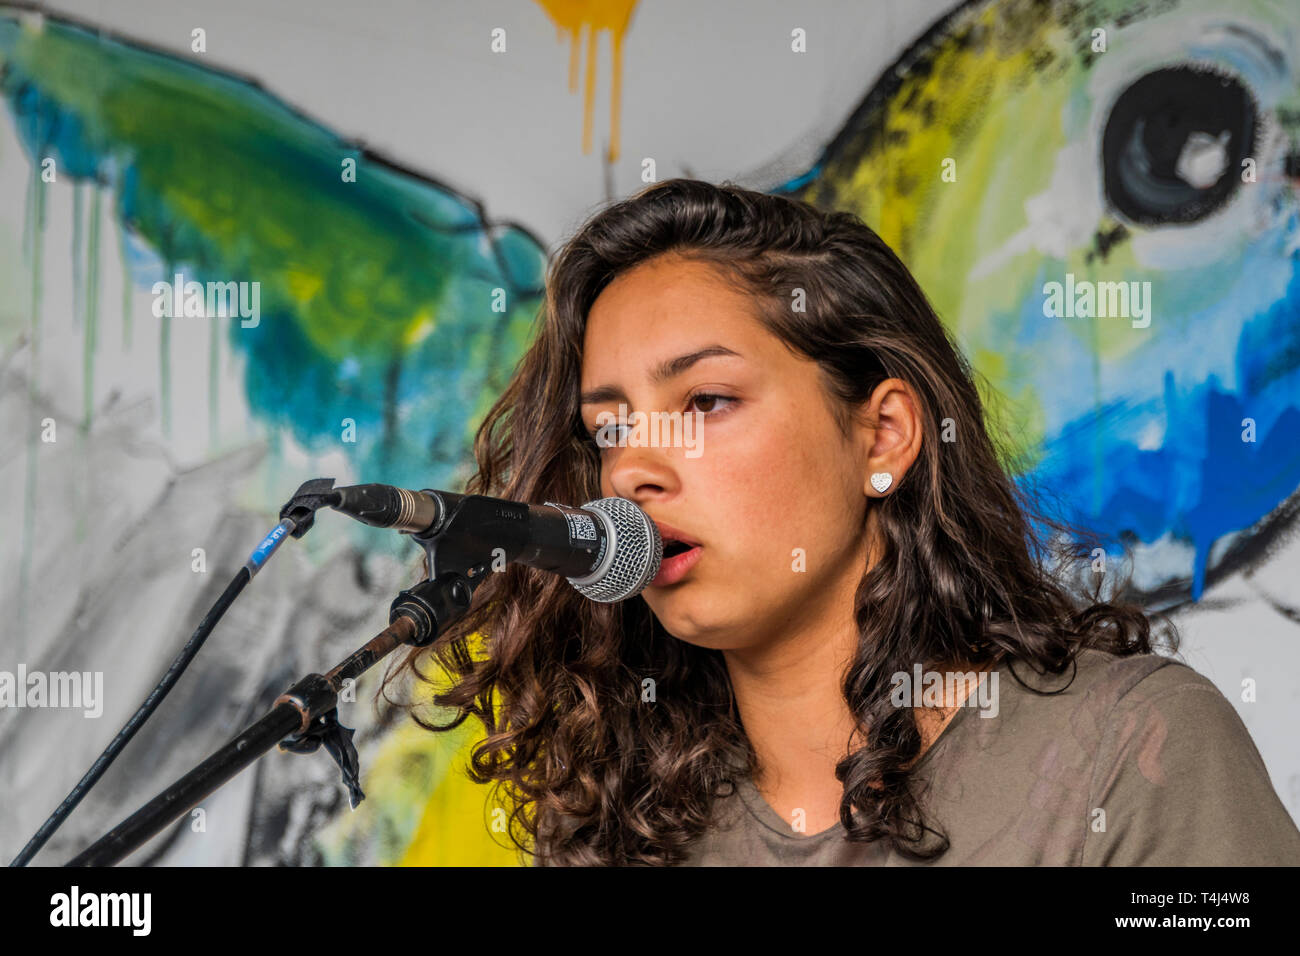 London, UK. 17th Apr, 2019. Asha Menon, (pictured) aged 12, performs music she has created in support of Extinction rebellion. The audience is very appreciative - The festival continues on Waterloo Bridge as the police back off for a while - Day 3 - Protestors from Extinction Rebellion block several junctions in London as part of their ongoing protest to demand action by the UK Government on the 'climate chrisis'. The action is part of an international co-ordinated protest. Credit: Guy Bell/Alamy Live News Stock Photo